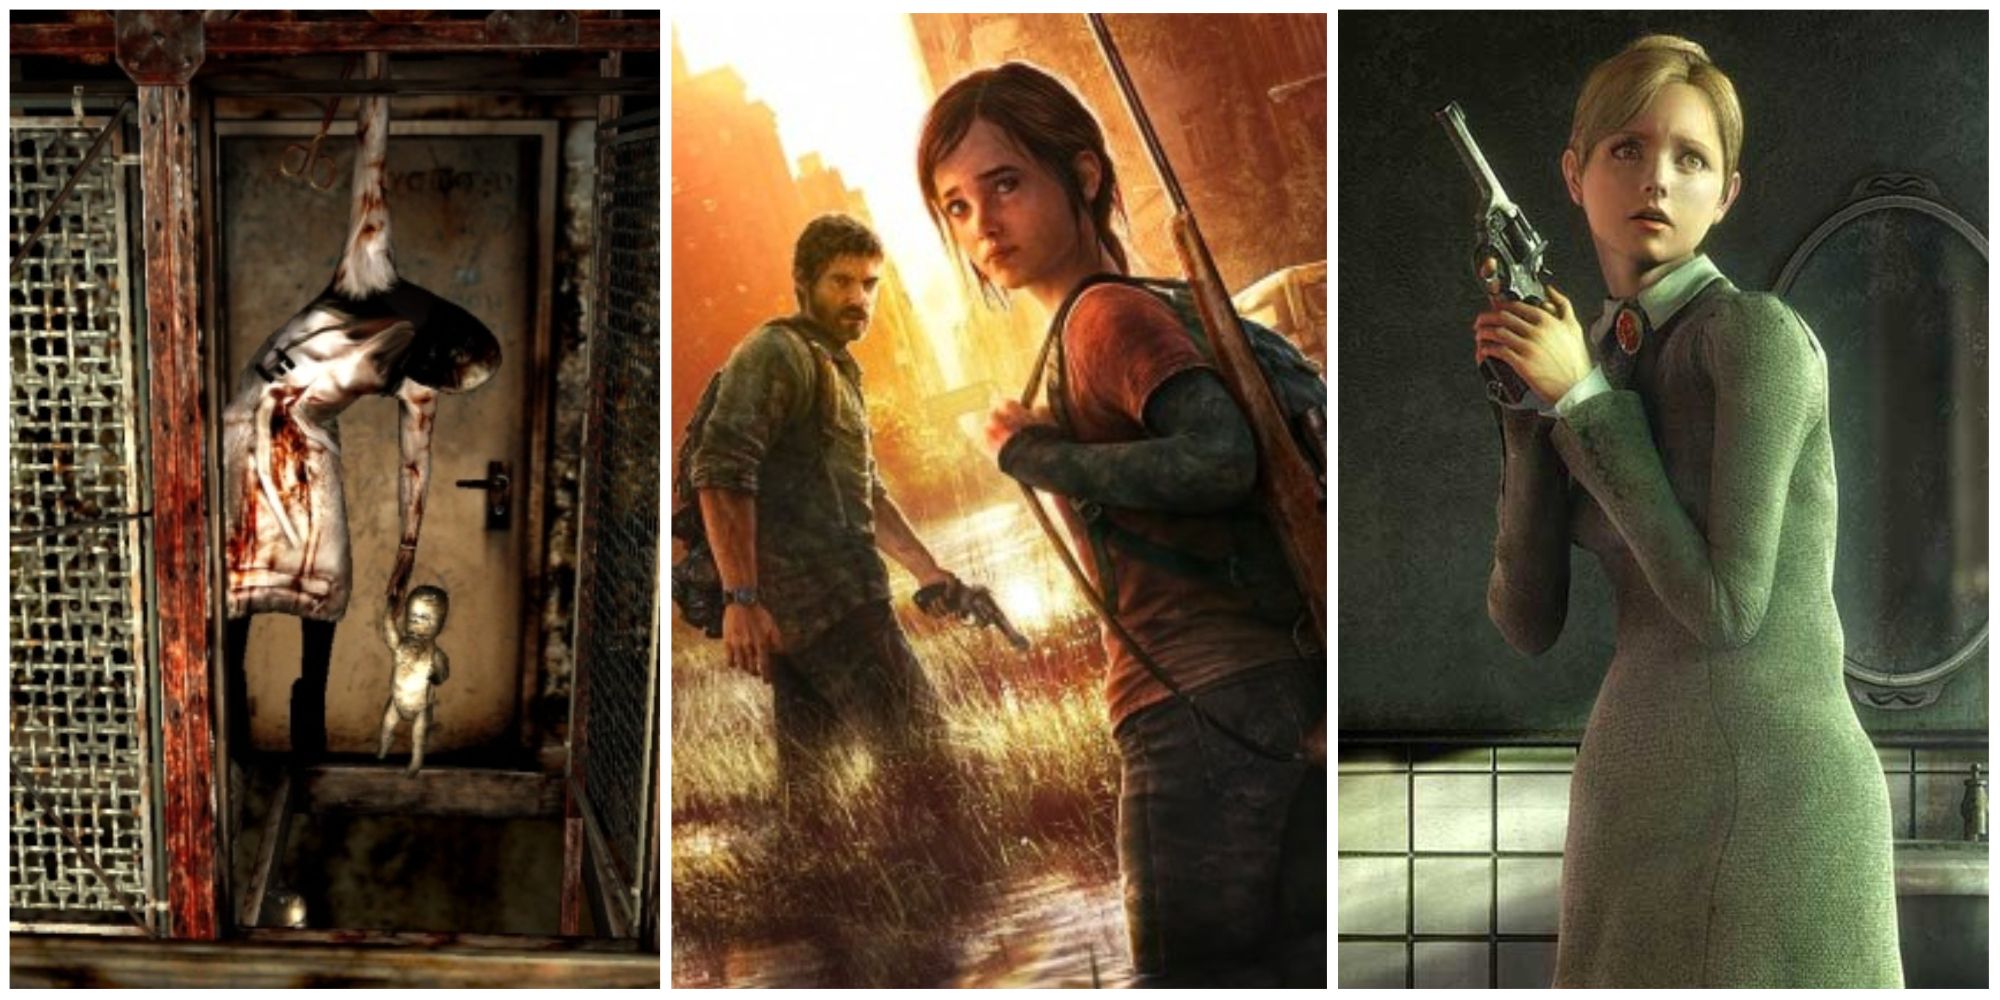 Valtiel from Silent Hill 3, Ellie and Joel from Last of Us, and Jennifer from Rule of Rose